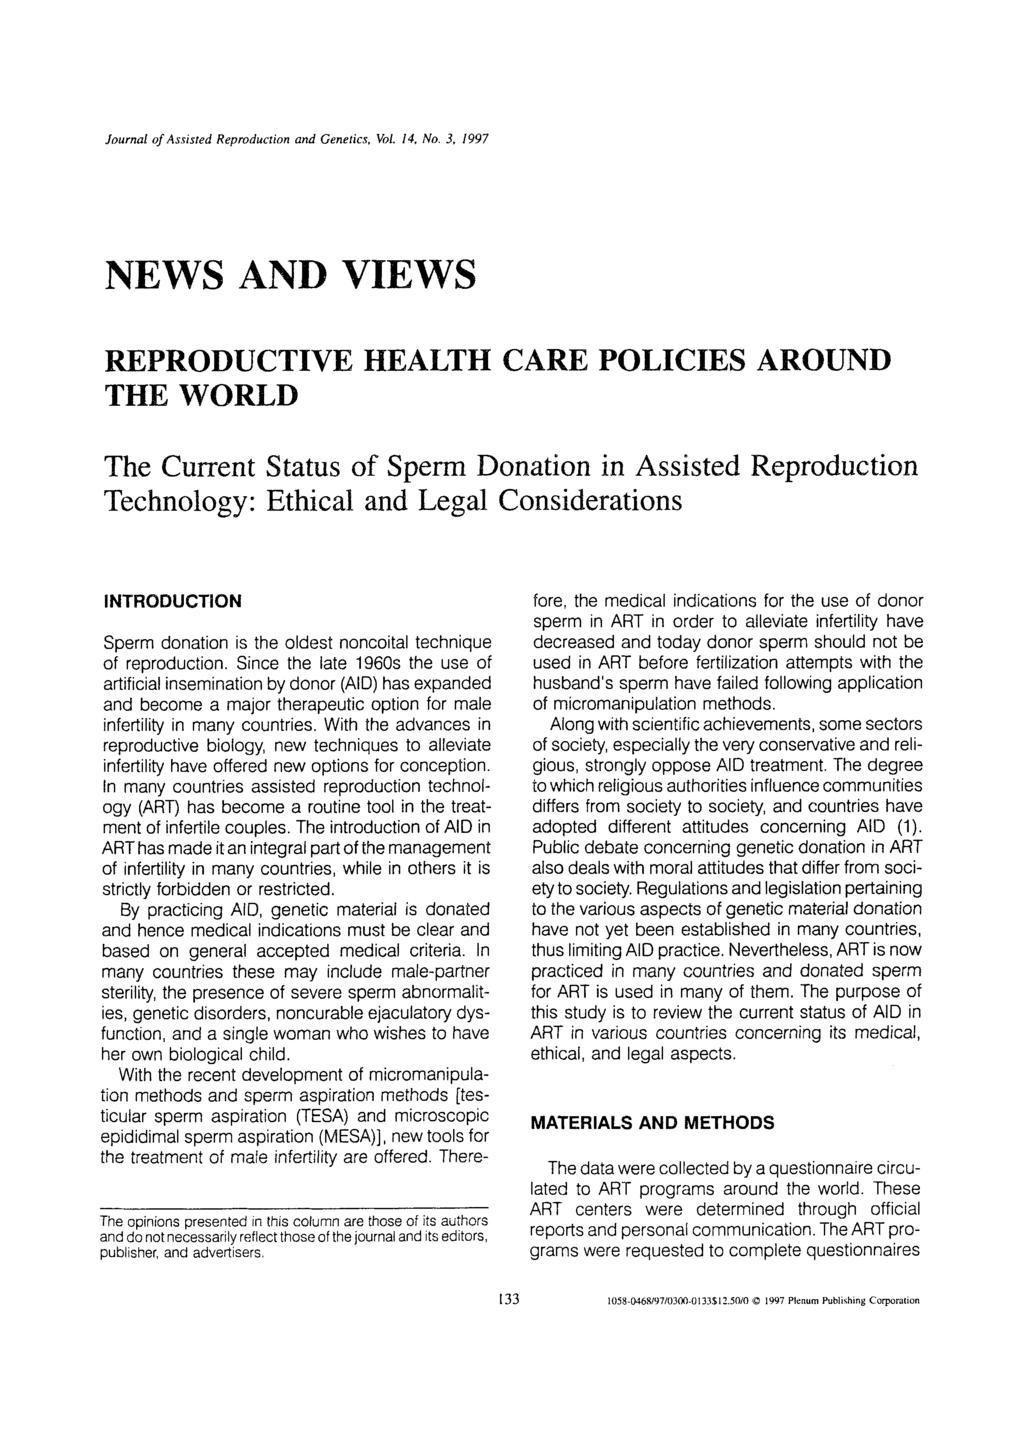 NEWS AND VIEWS REPRODUCTIVE HEALTH CARE POLICIES AROUND THE WORLD The Current Status of Sperm Donation in Assisted Reproduction Technology: Ethical and Legal Considerations INTRODUCTION Sperm